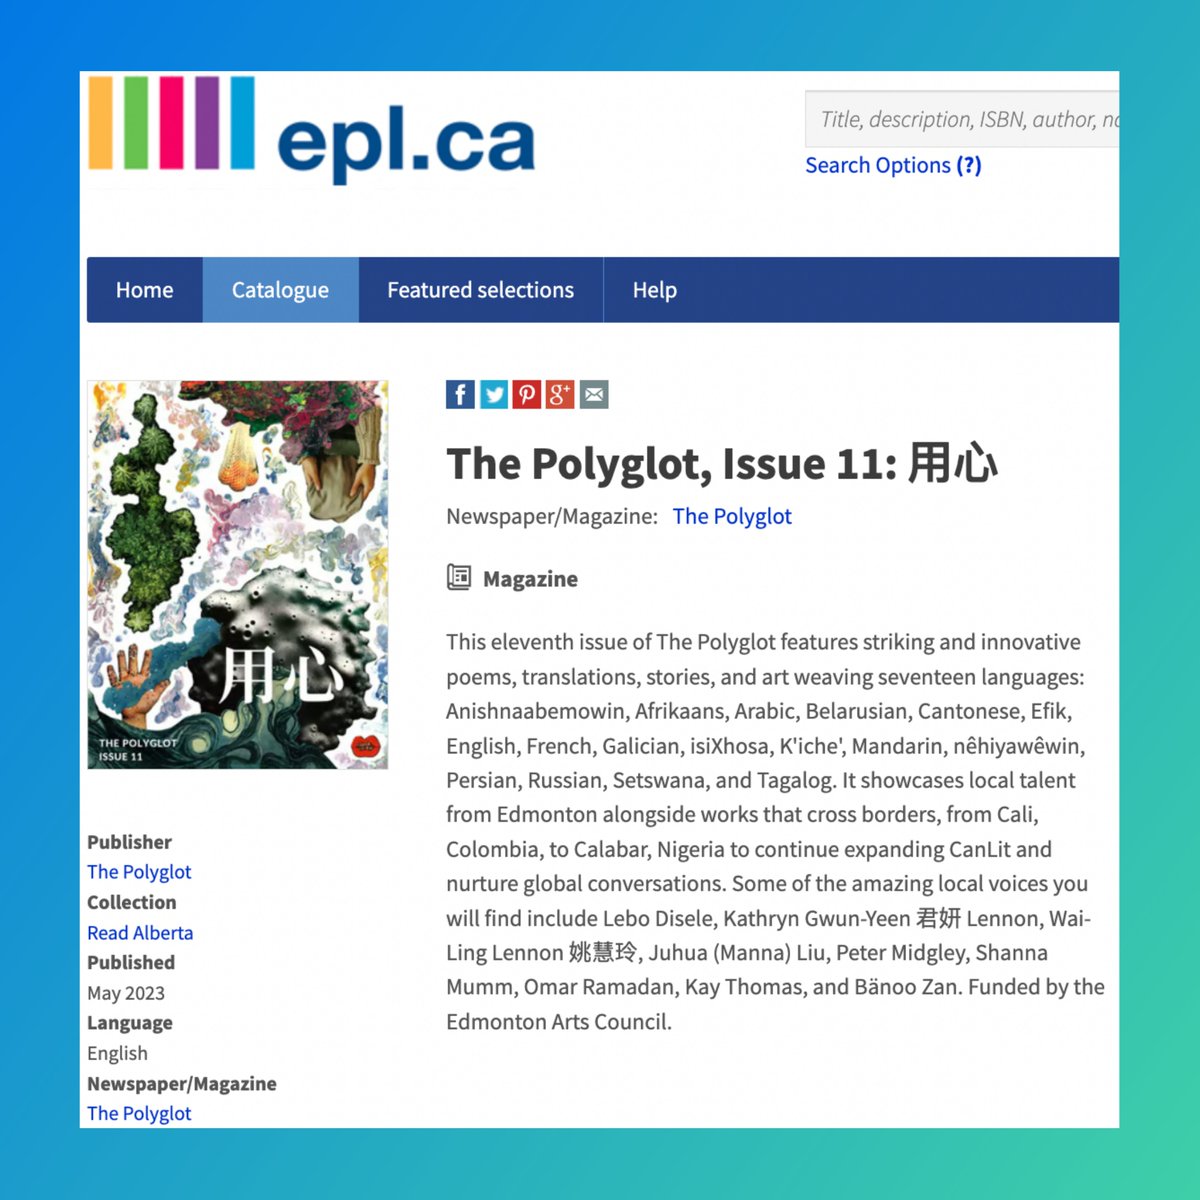 With just a click, you can access The Polyglot's latest issue from @EPLdotCA, thanks to your library card.
 epl.cantookstation.com/resources/6478…

Thank you to @YourAlberta and @albertamags for expanding the #ReadAlberta eMagazine collection!